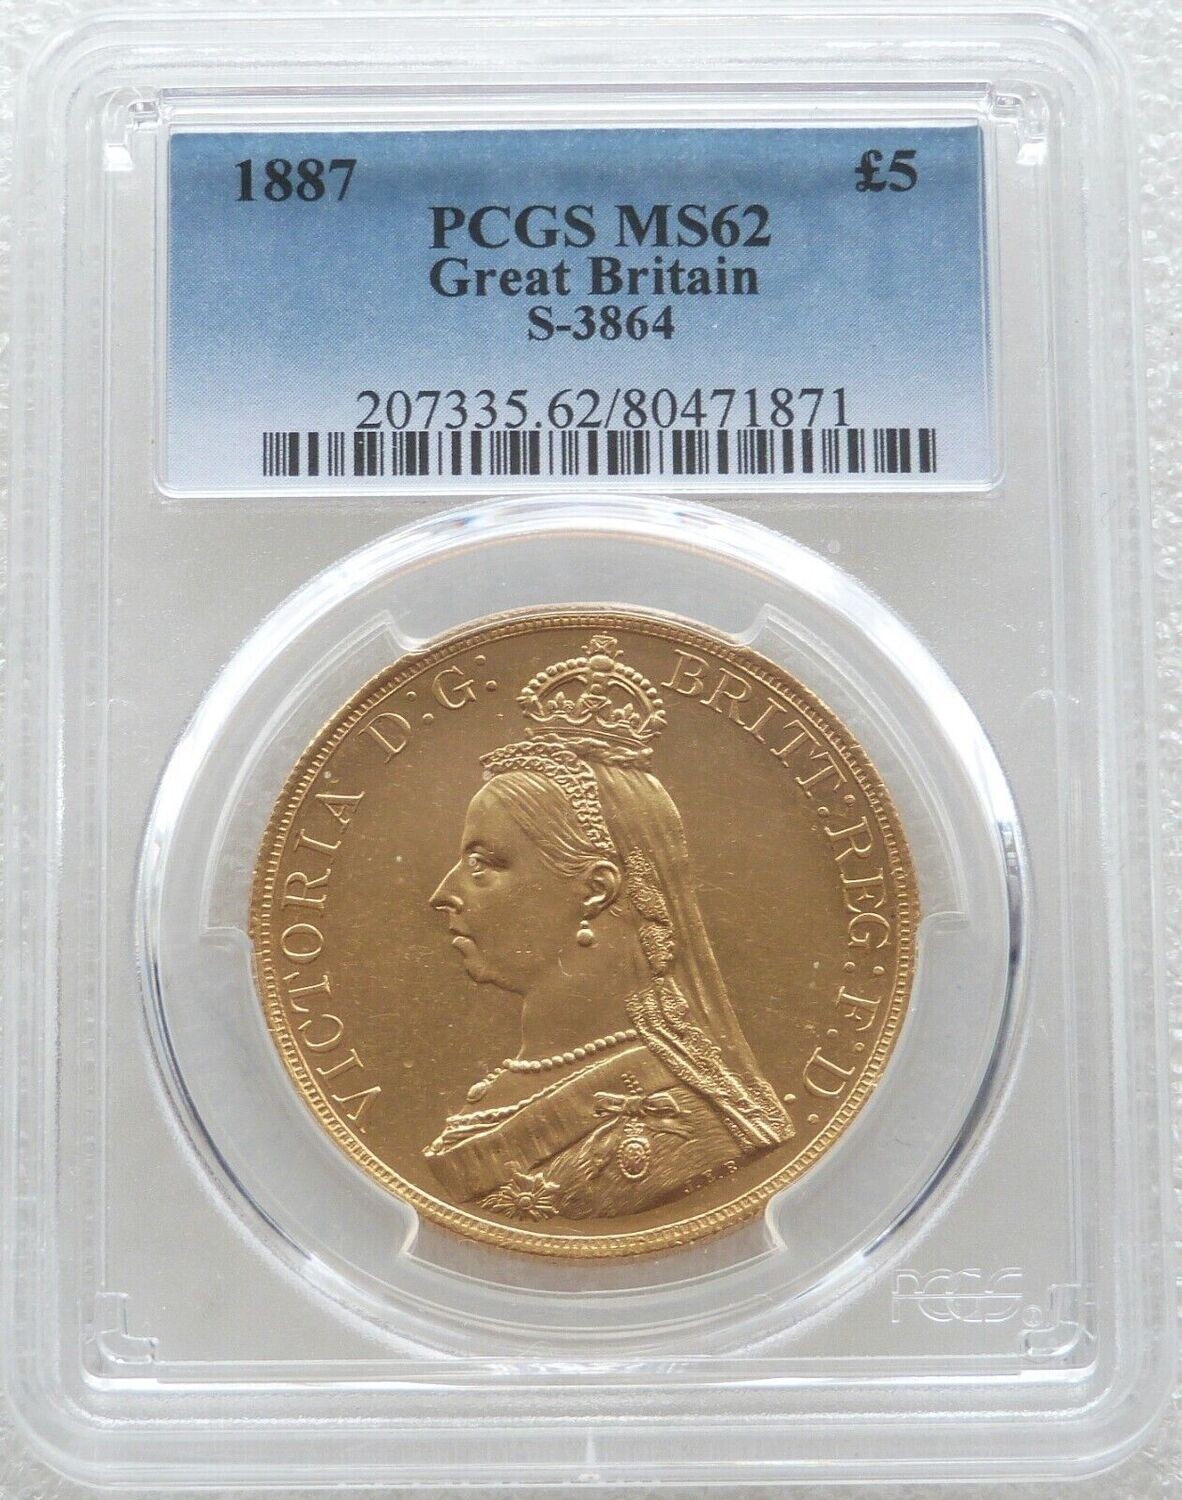 1887 Victoria Jubilee Head £5 Sovereign Gold Coin PCGS MS62